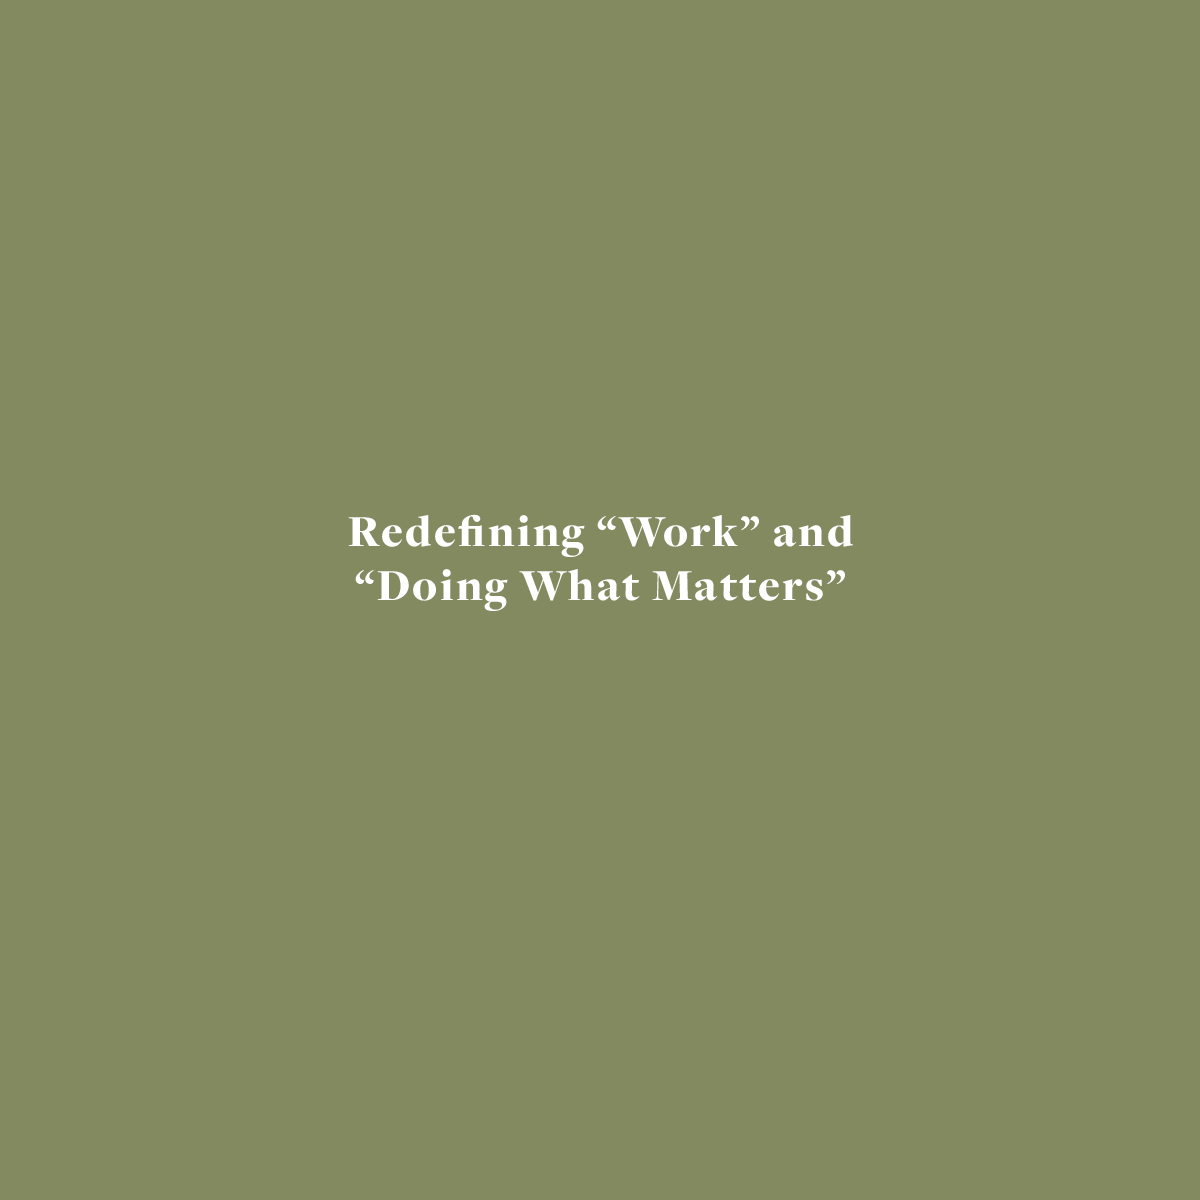 Redefining “Work” and “Doing What Matters”